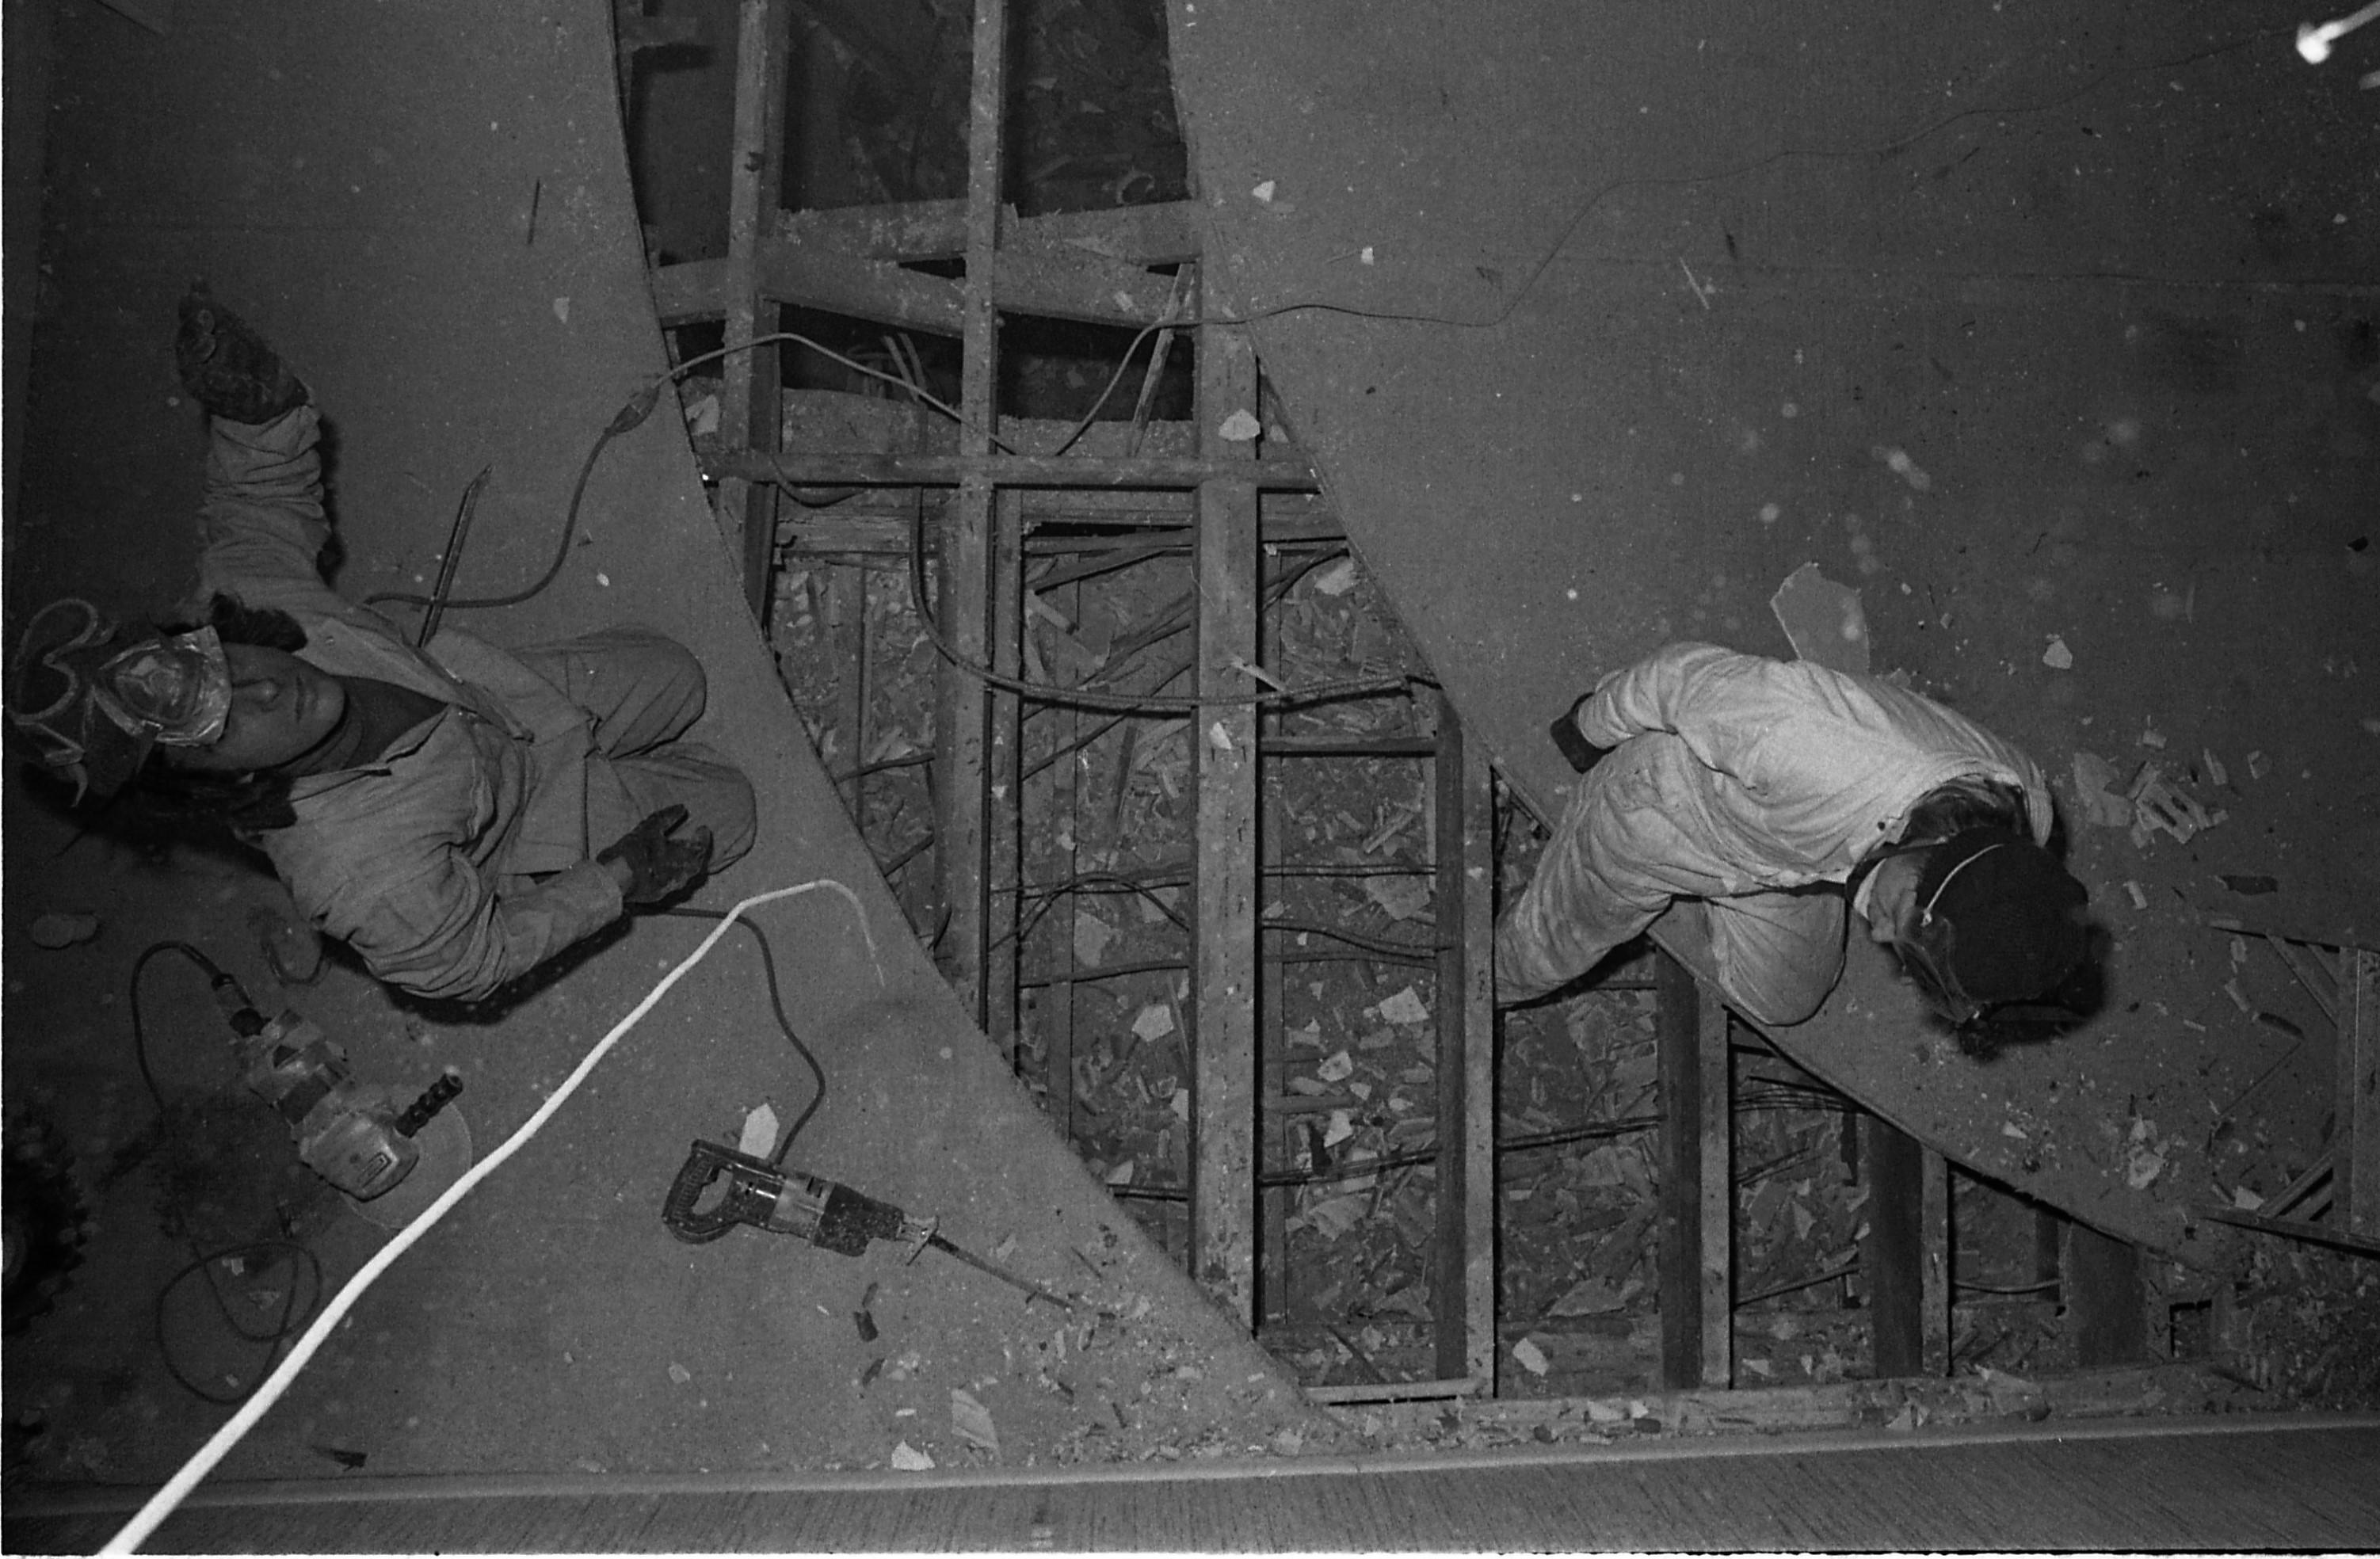 Two people in coveralls sit on the edge of a curved cut in a floor.